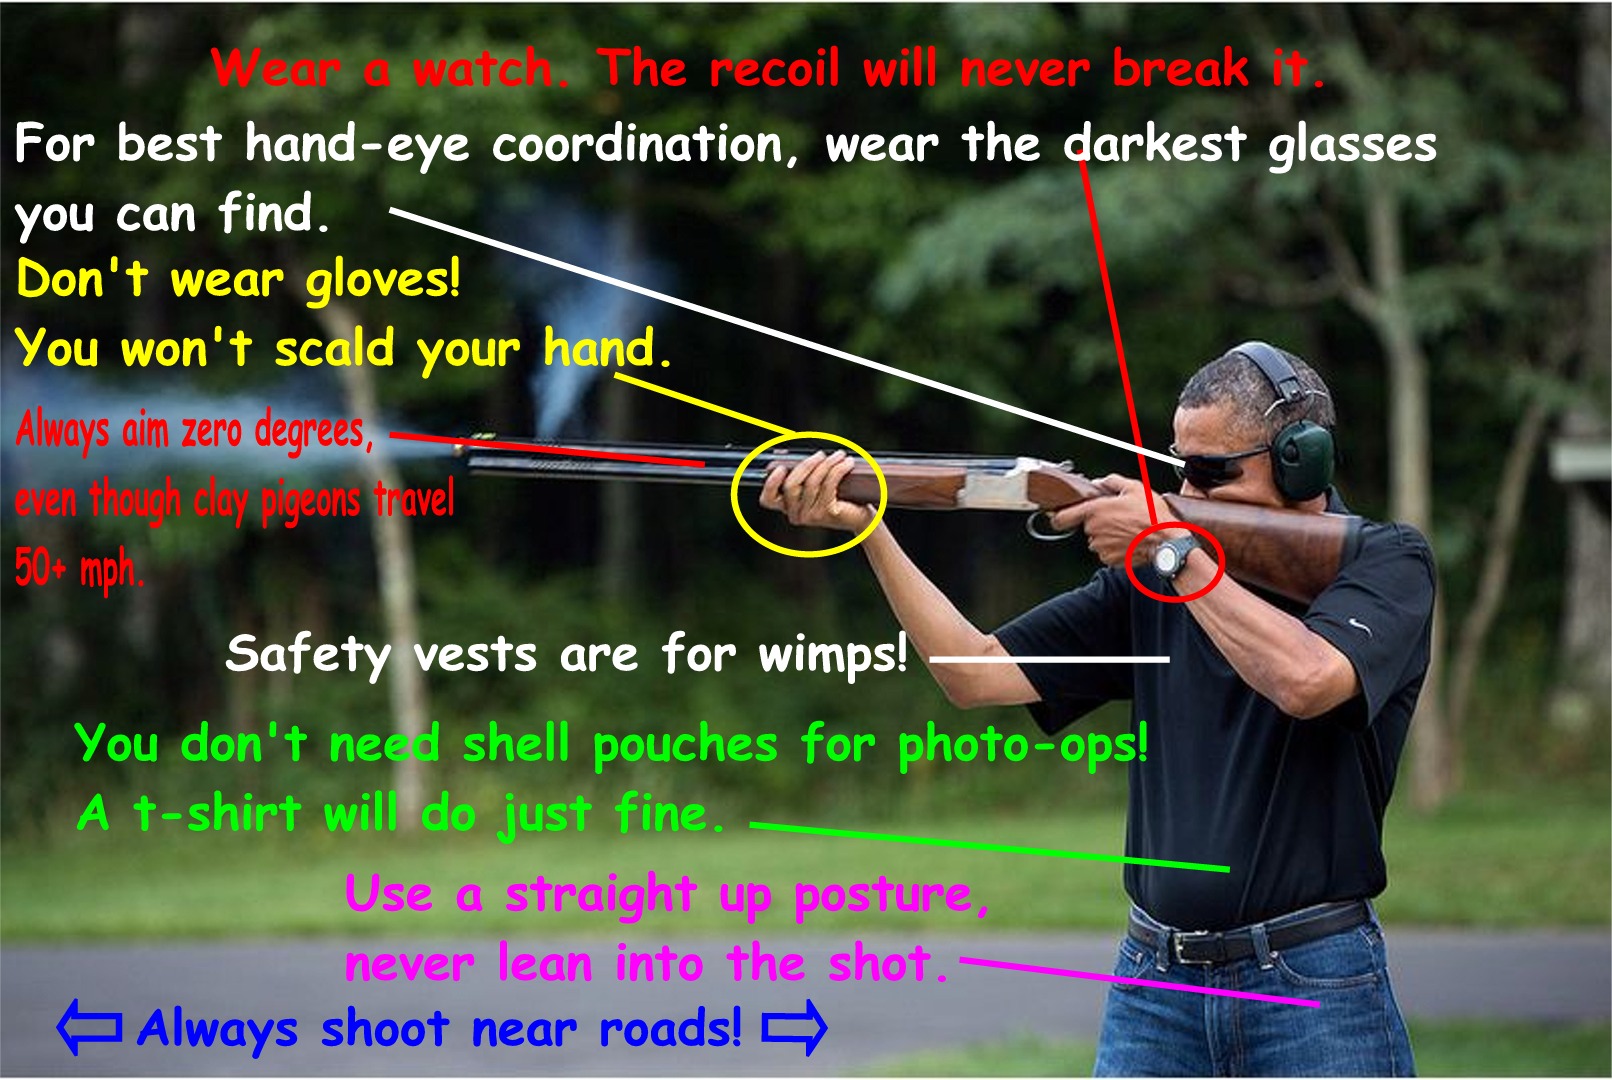 He goes skeet-shooting "all the time", according to the media liars. Hmm, let's see how he does it.